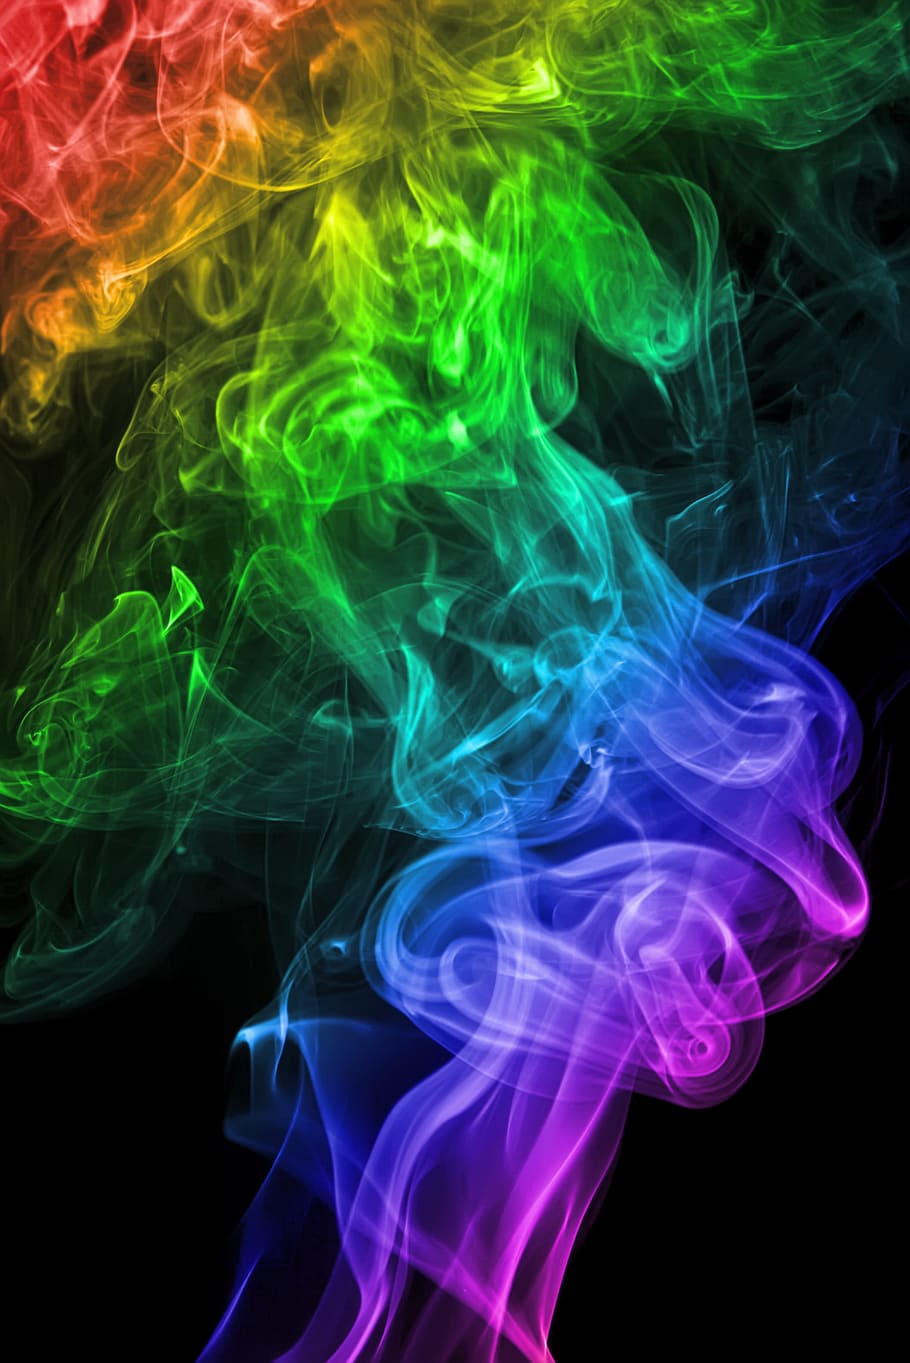 smoke, smell, color, aroma, abstract, background, aromatherapy, pattern ...